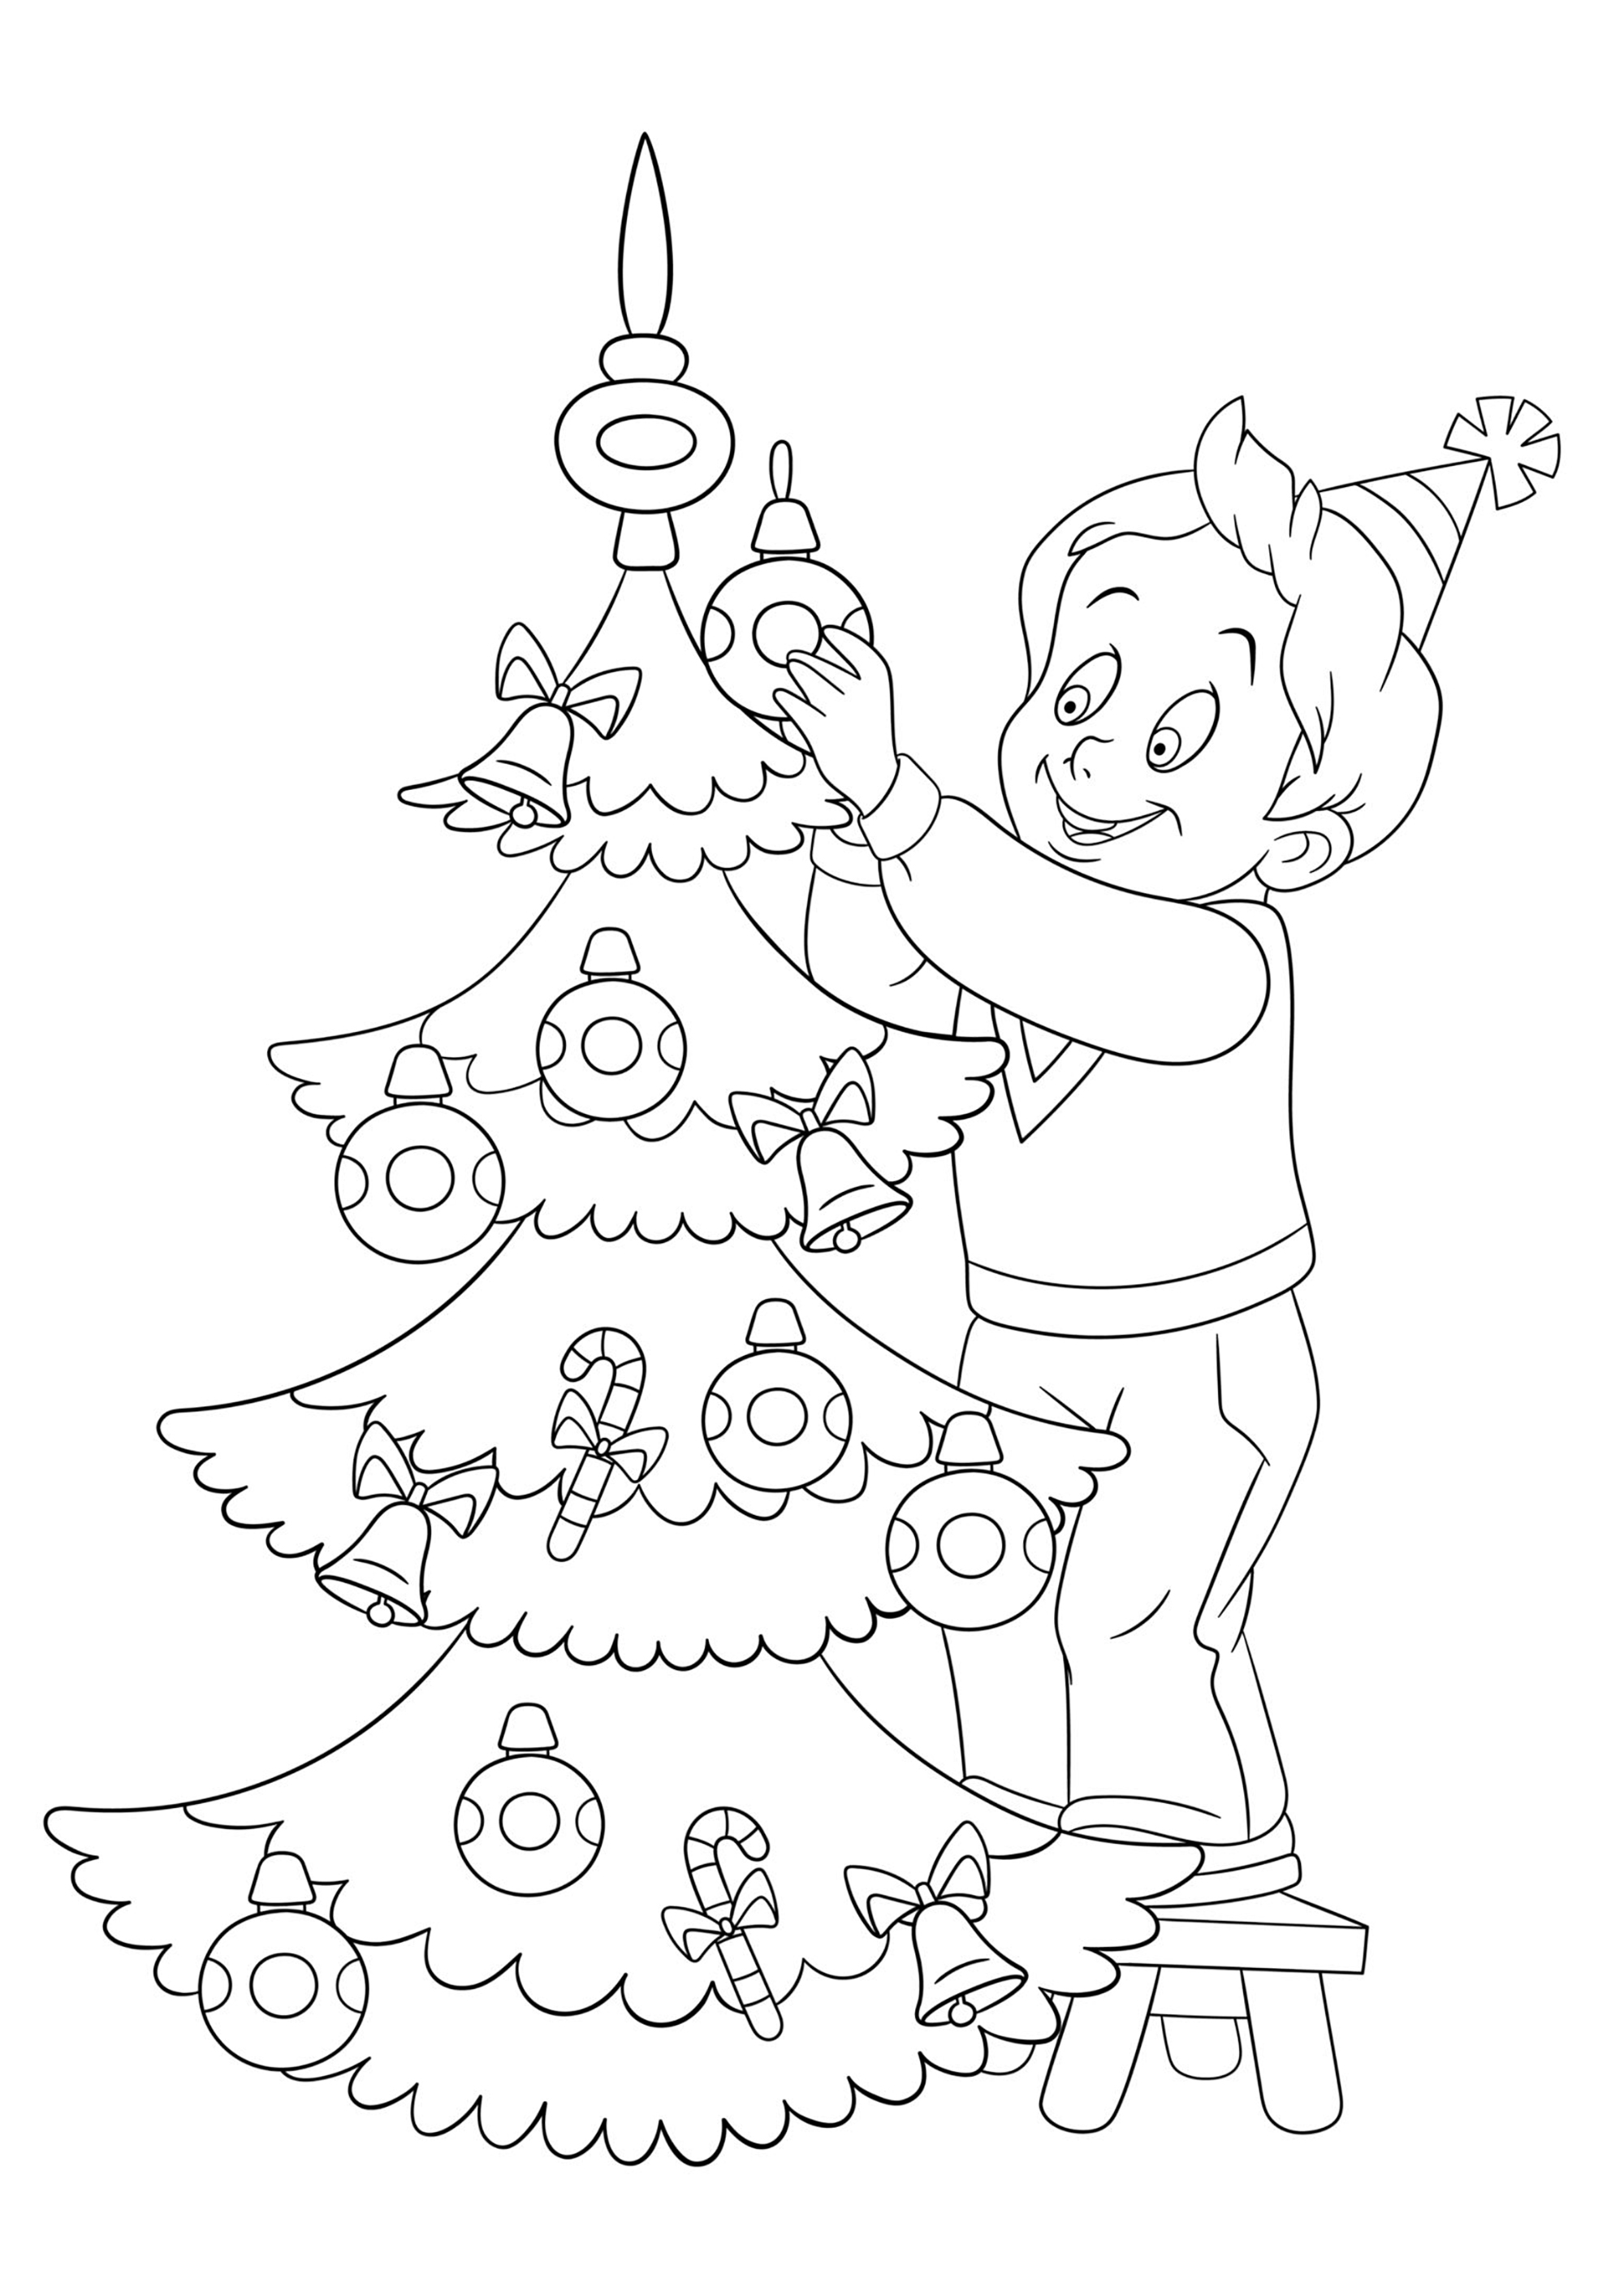 Christmas Coloring Page Images 226  File Include SVG PNG EPS DXF